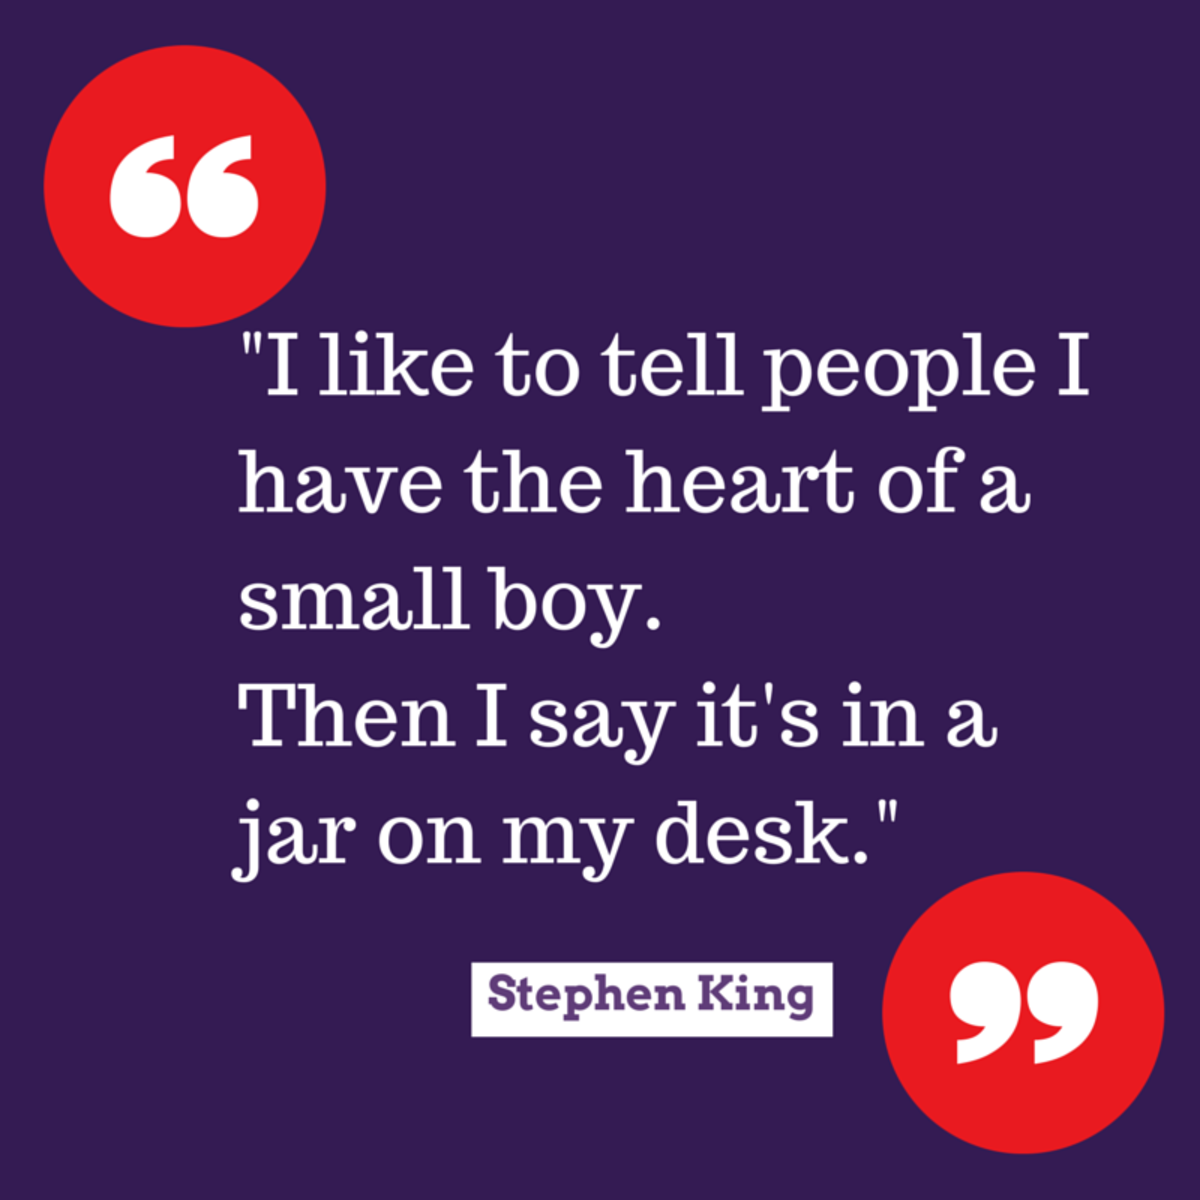 Funny quote: "I like to tell people I have the heart of a small boy. Then I say it's in a jar on my desk." -”Stephen King